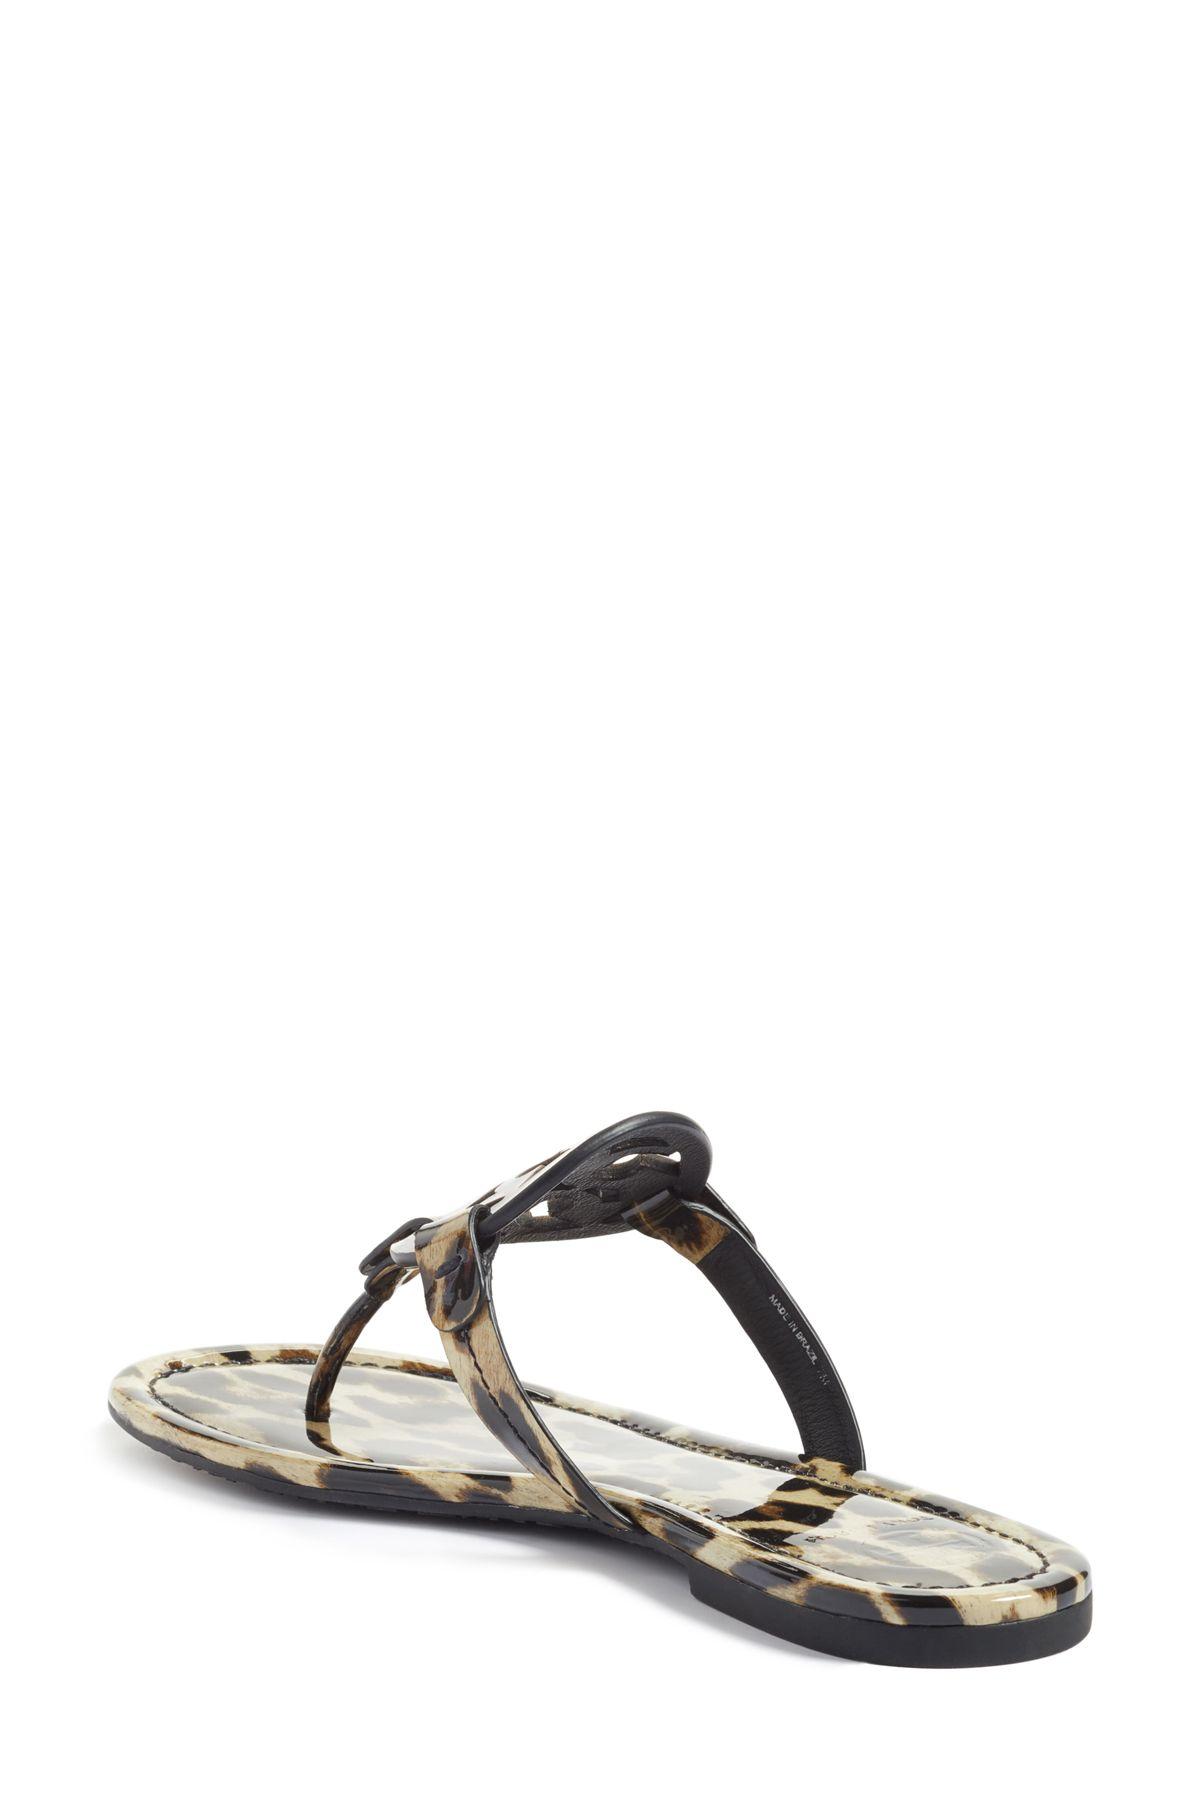 Tory Burch Miller Sandals, Printed Patent Leather | Lyst